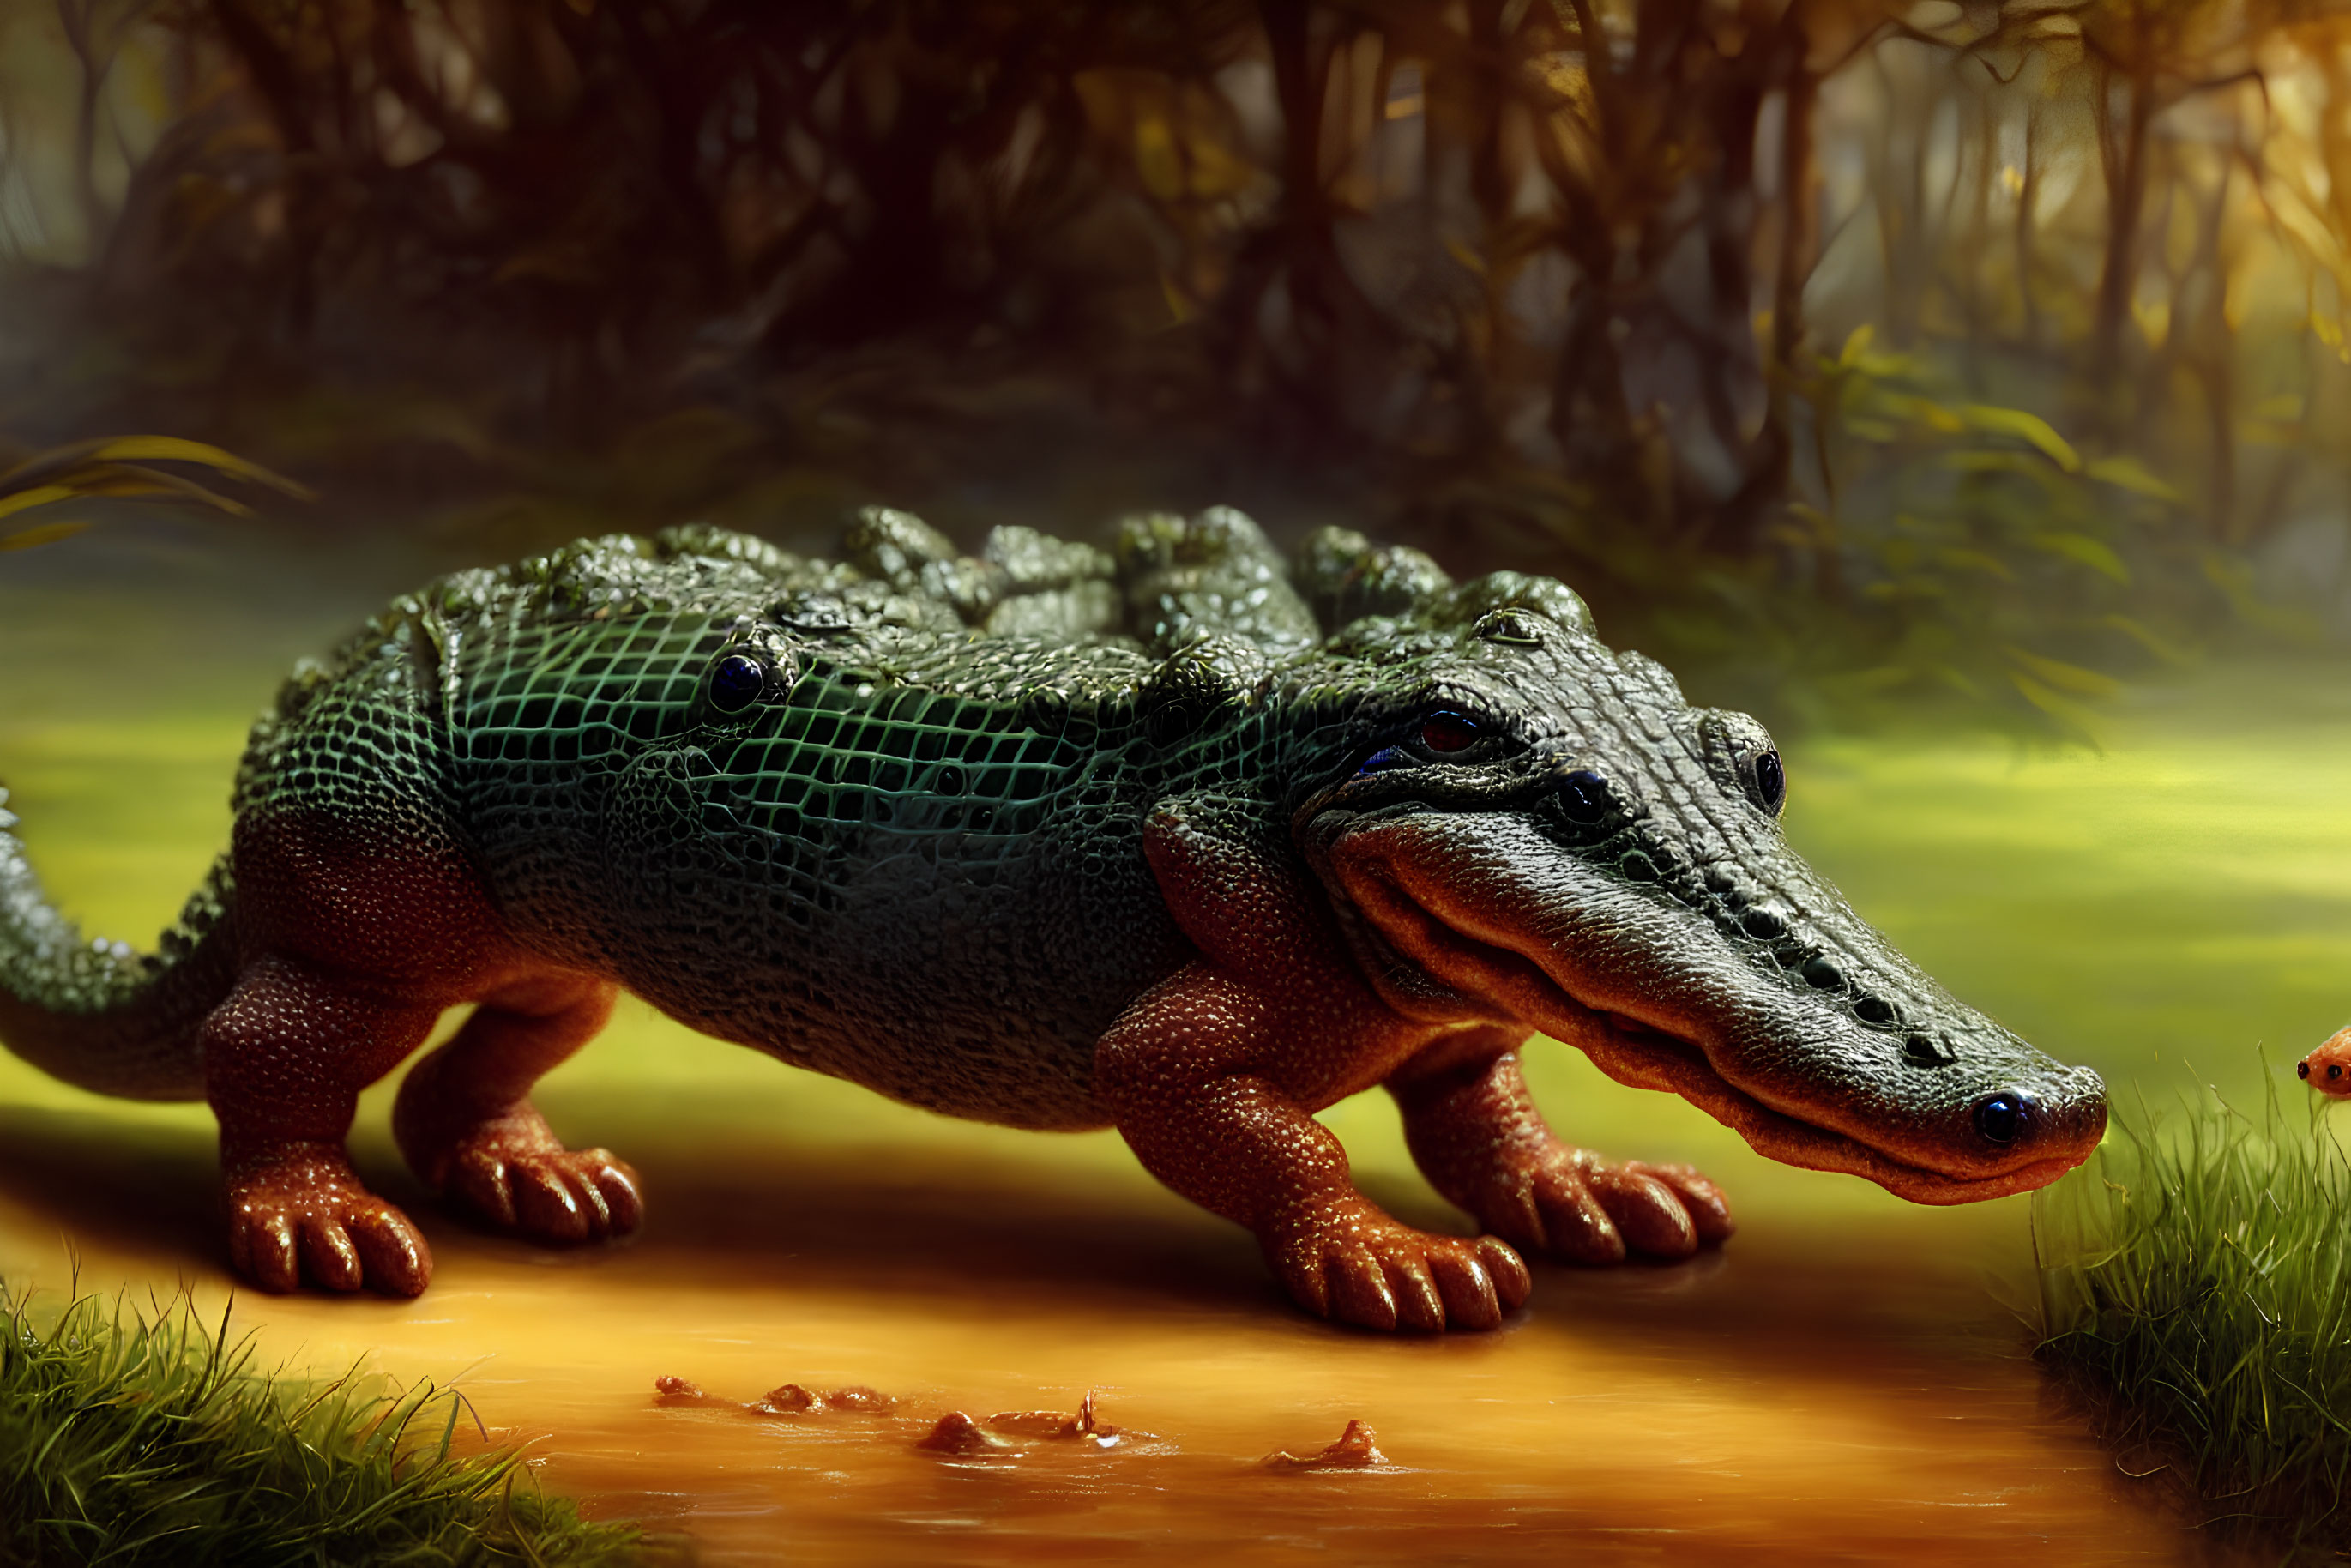 Detailed Green Alligator in Swampy Environment with Lush Vegetation